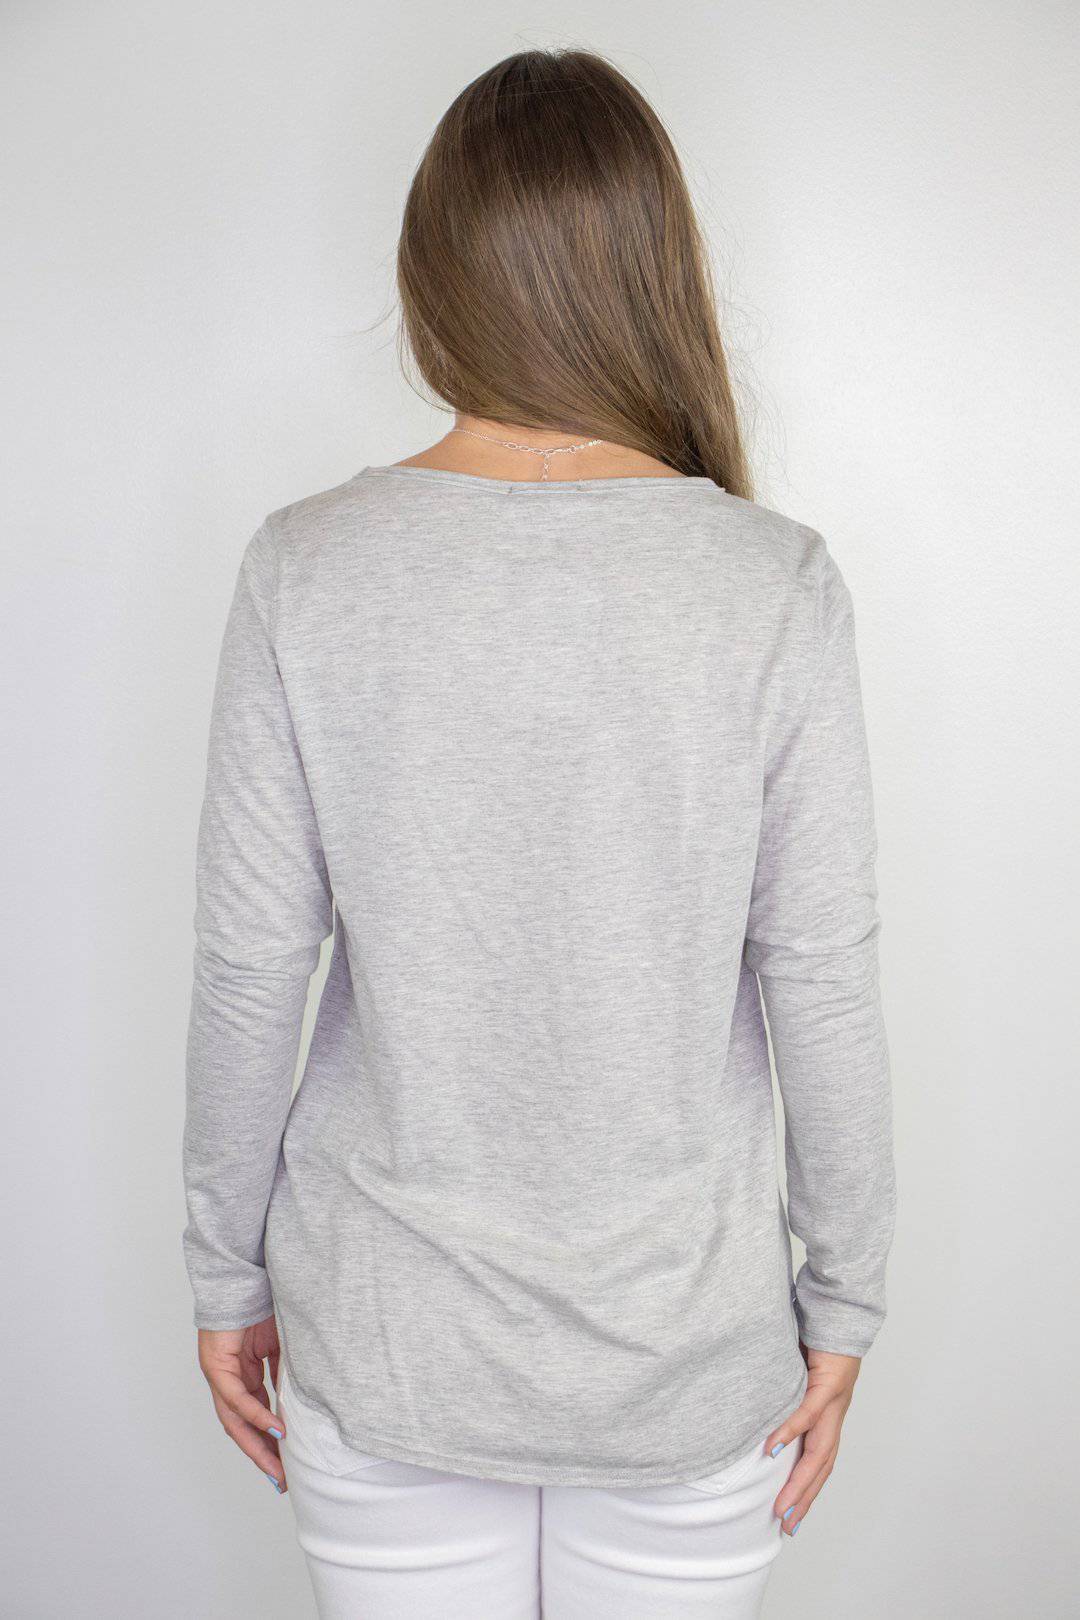 Grey Long Sleeve Tiger Top - Select Trends Boutique